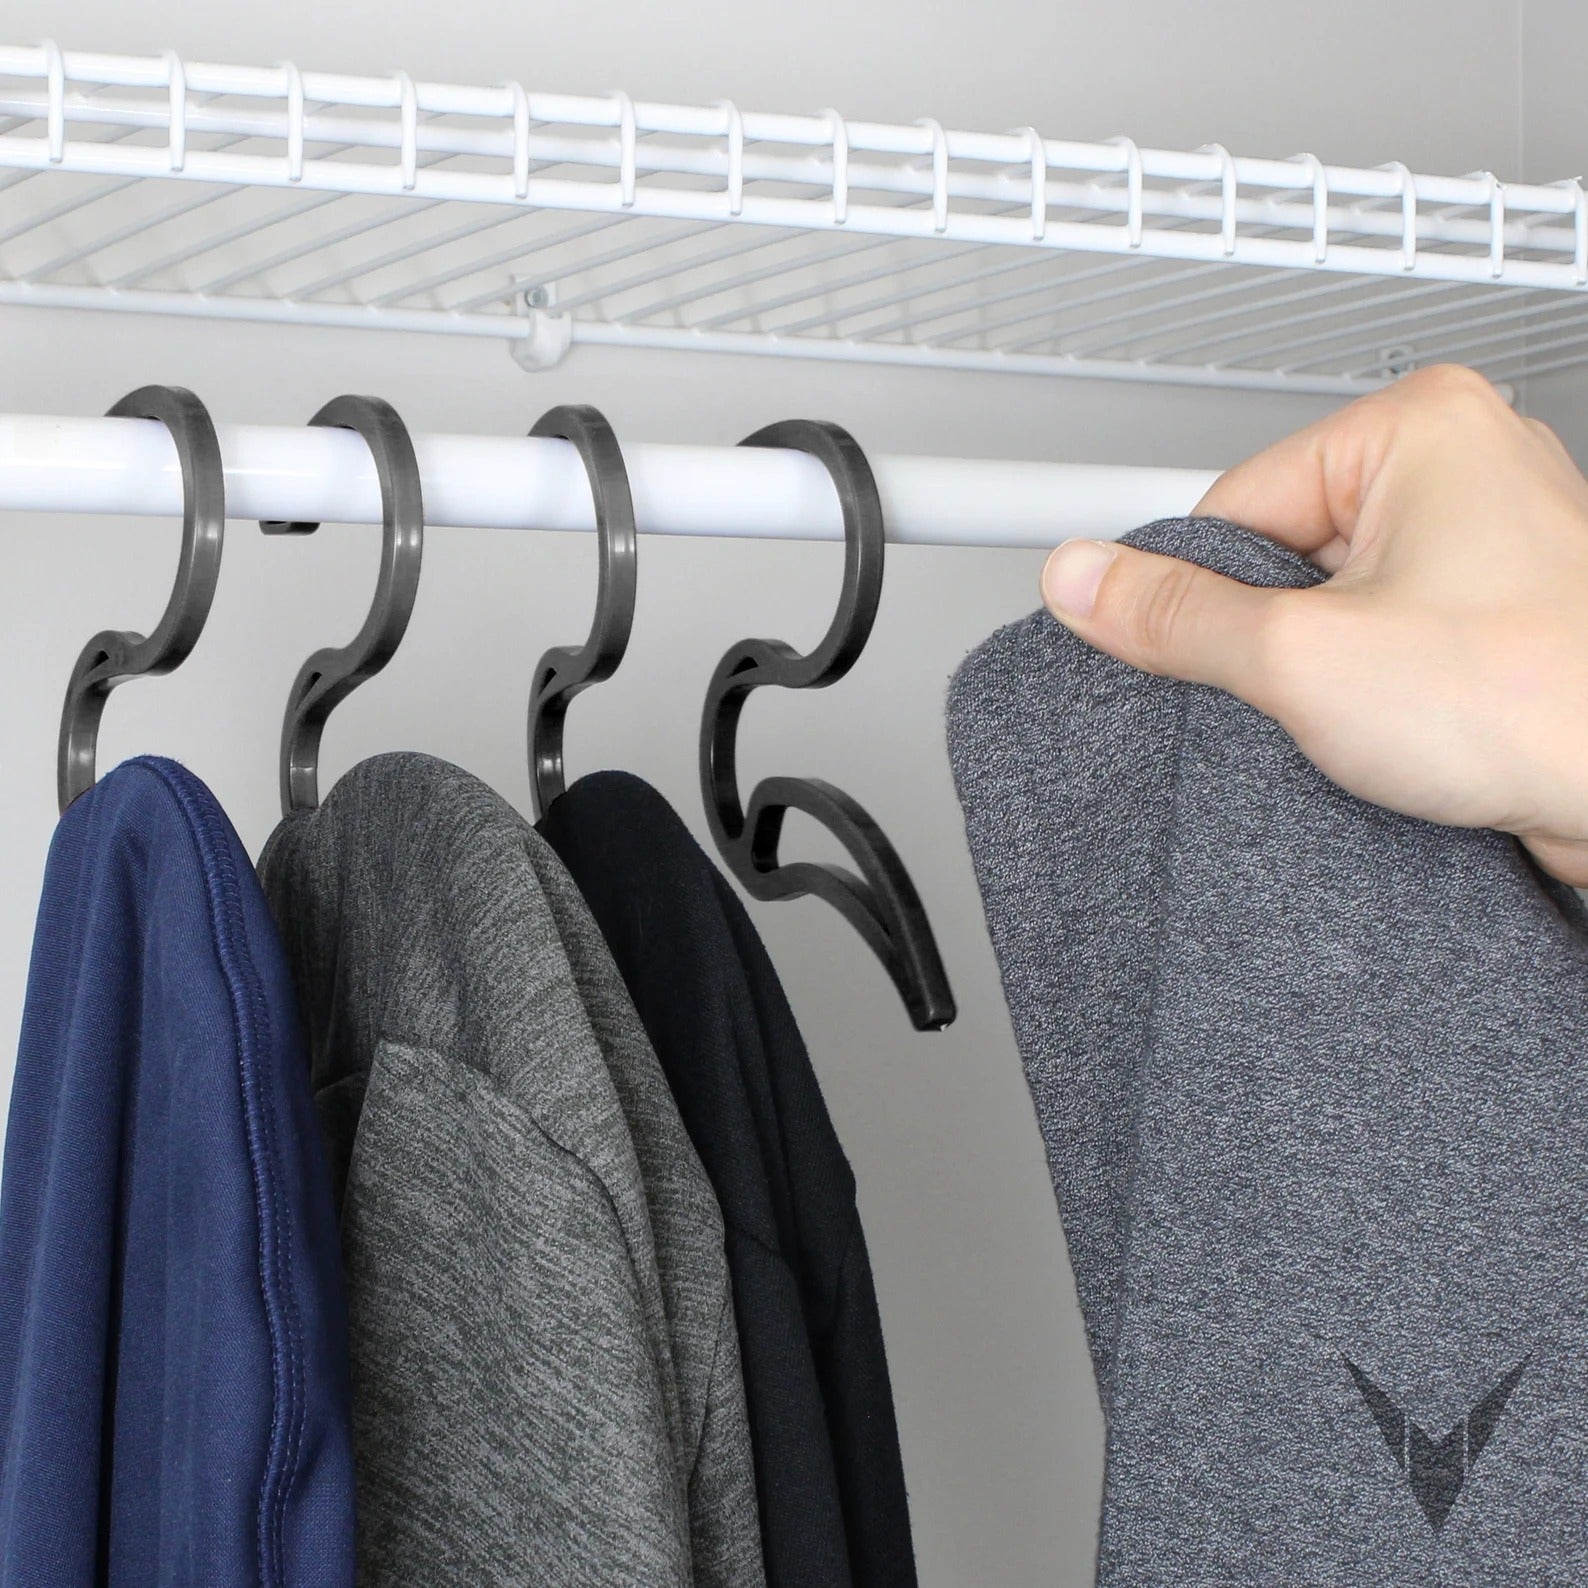 24 Clothing Organizers For People Whose Closets Are Overflowing